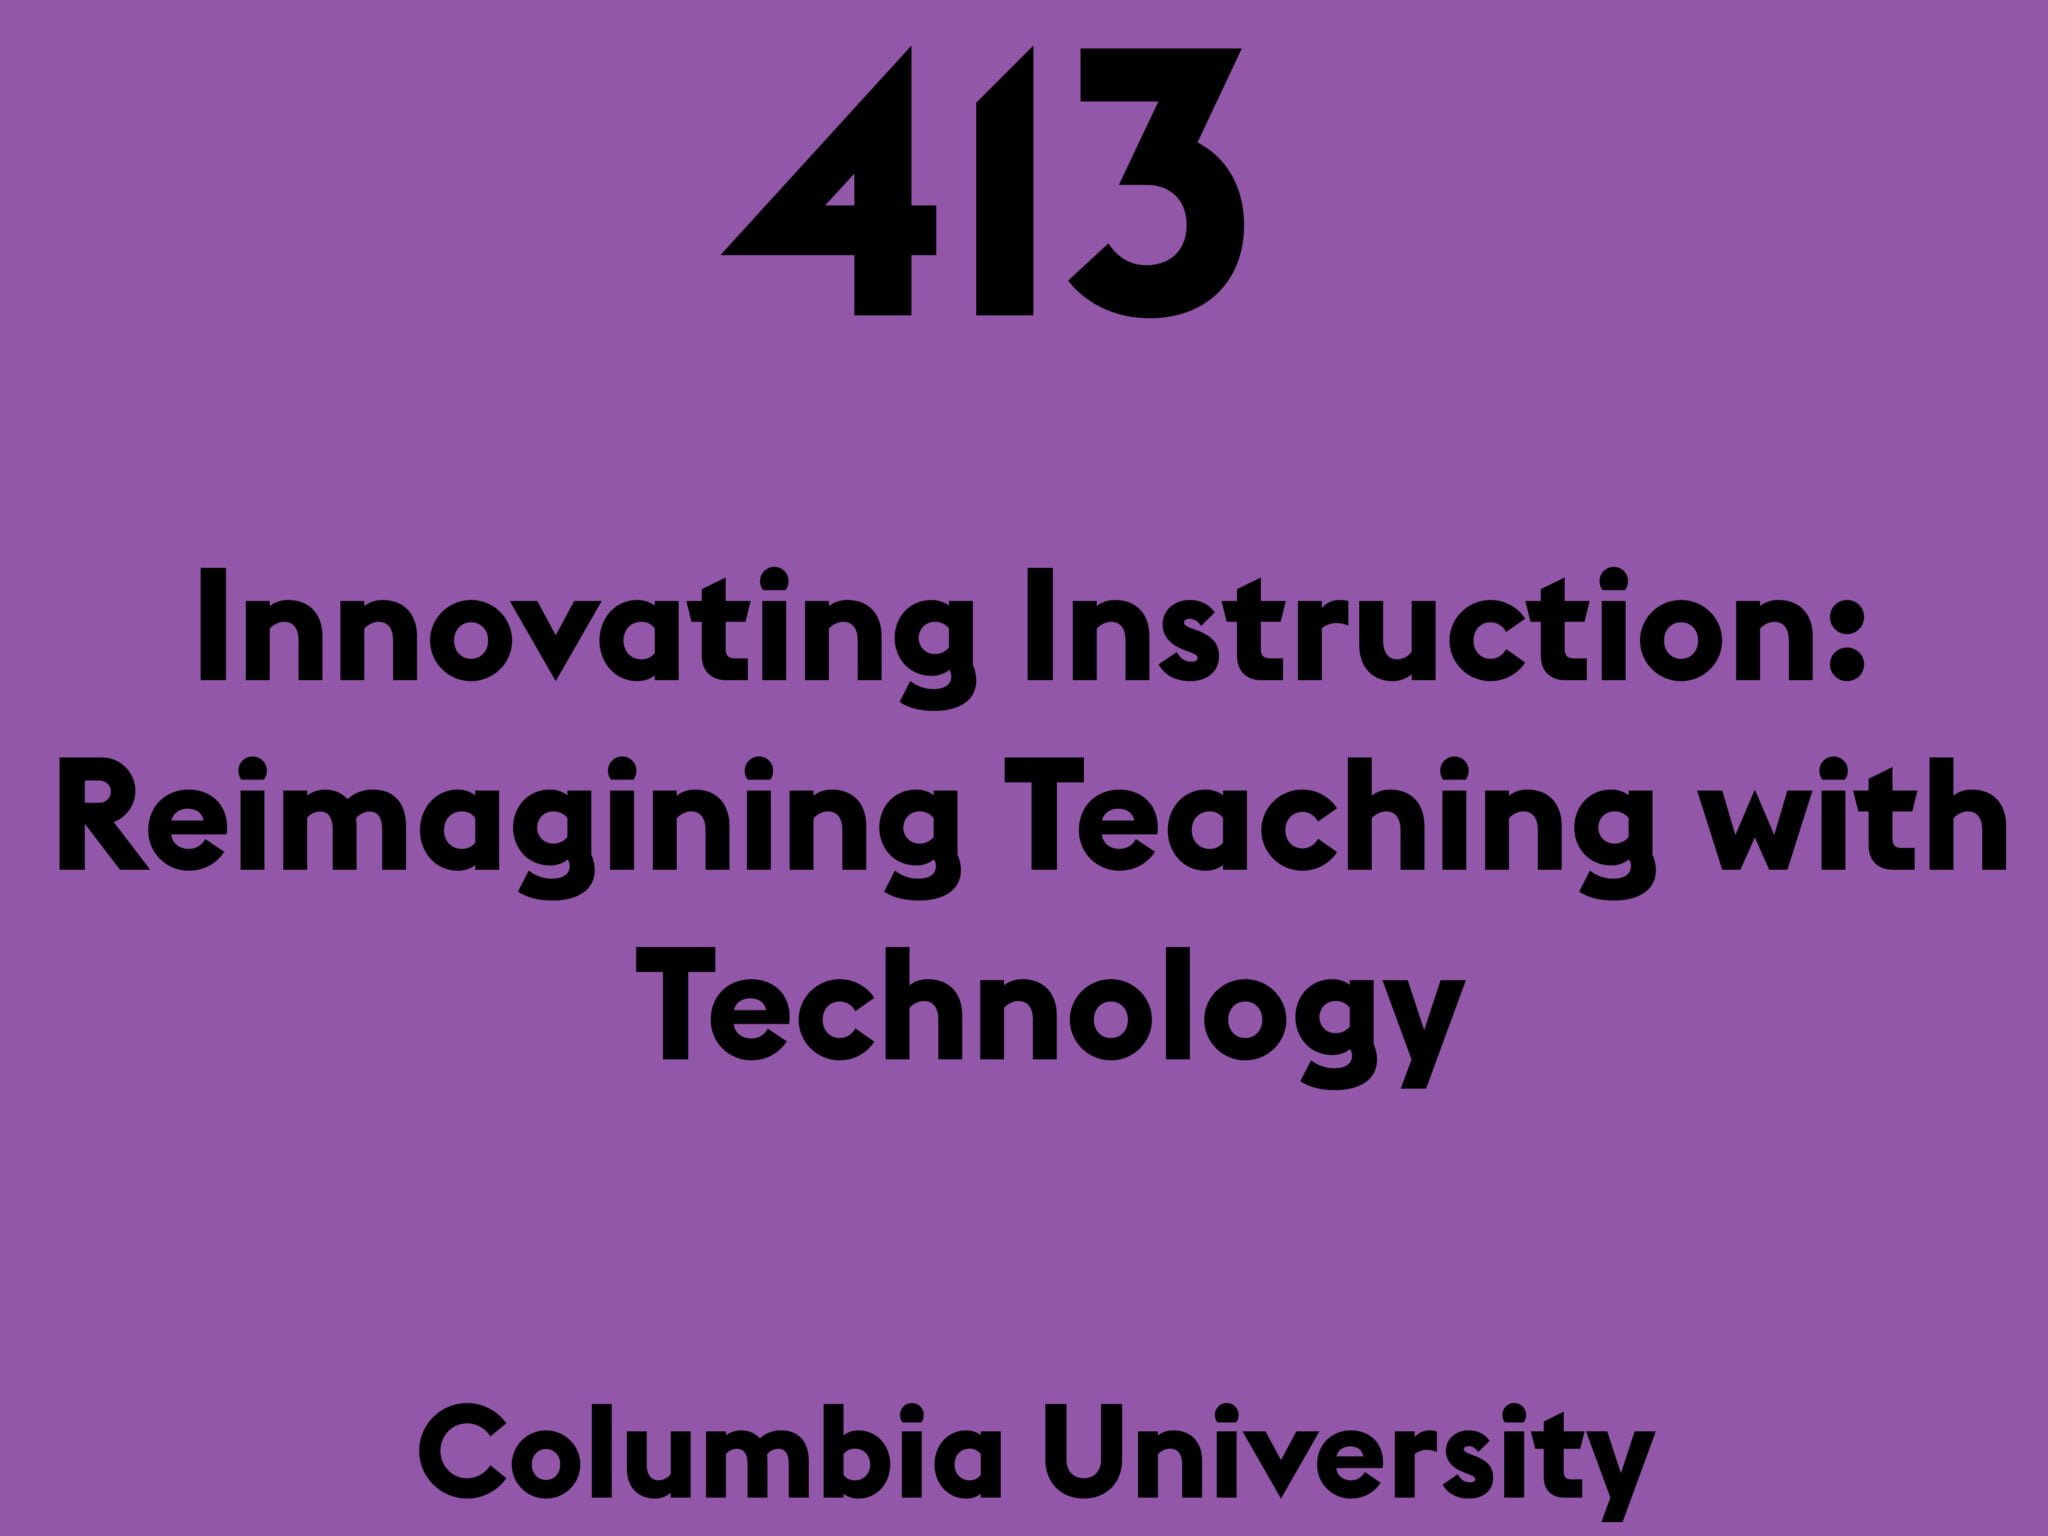 Innovating Instruction: Reimagining Teaching with Technology